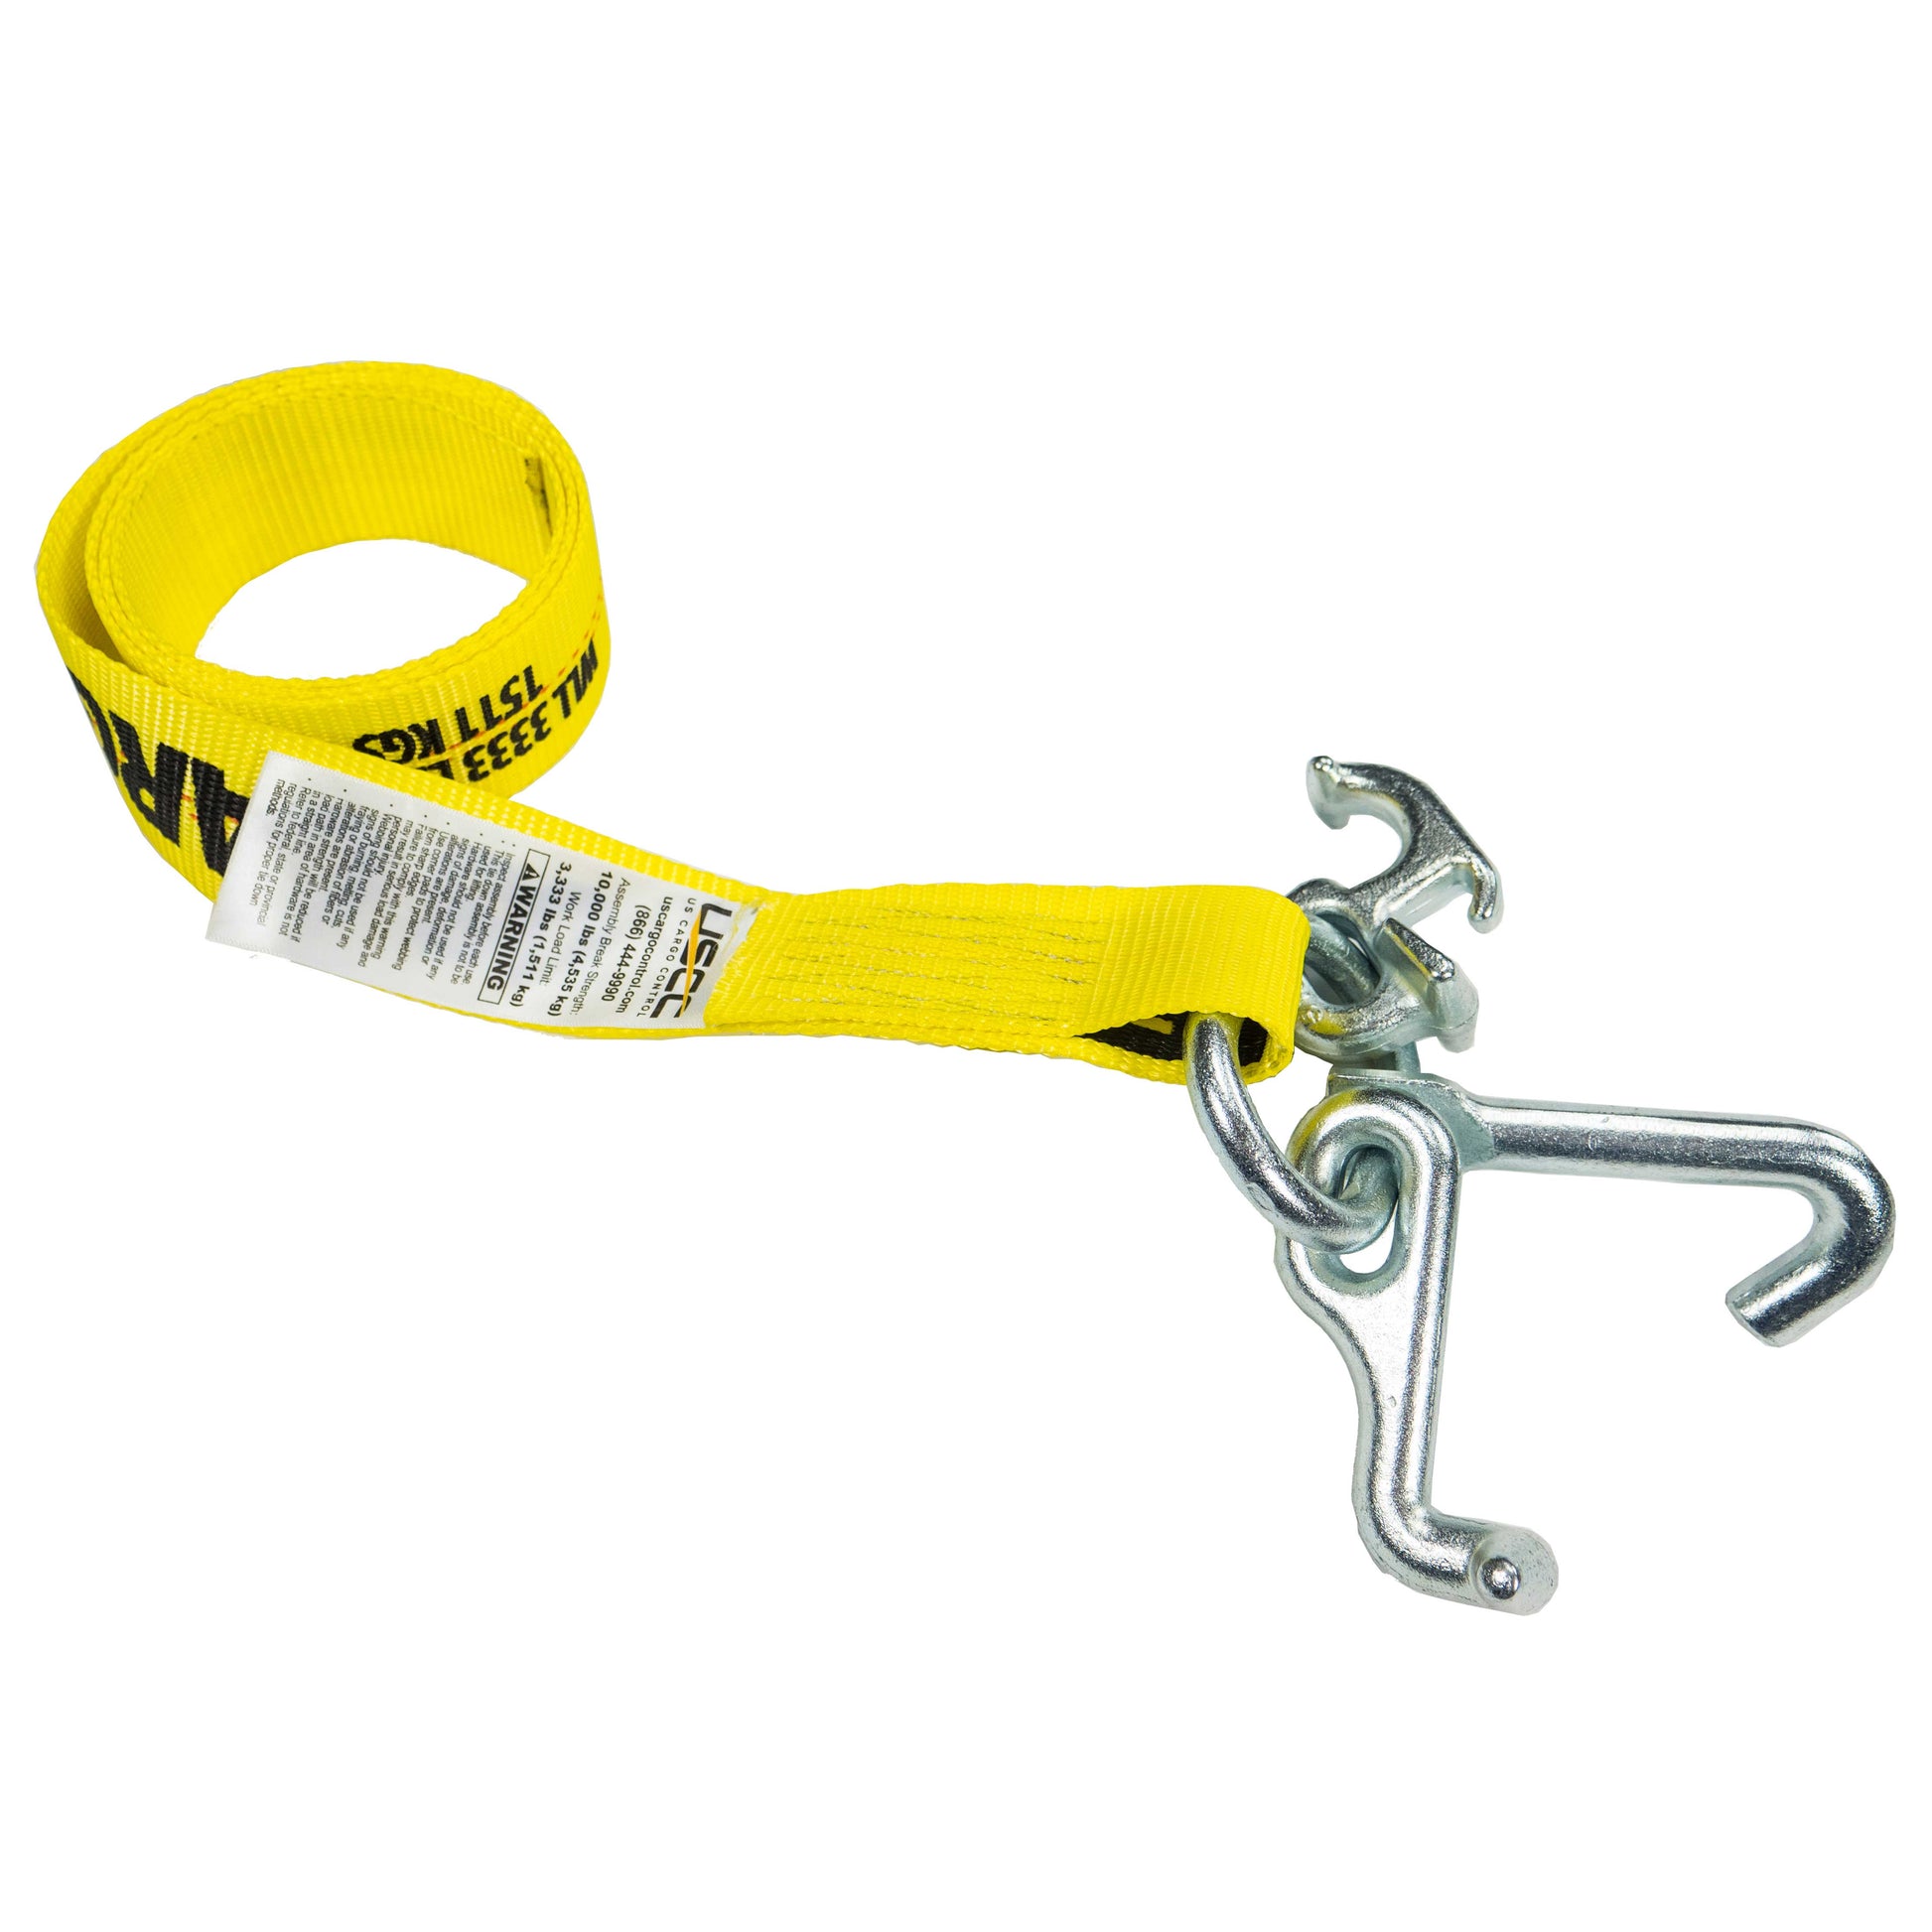 2 inch x 12 foot Replacement Strap with RTJ Cluster Hook image 1 of 8